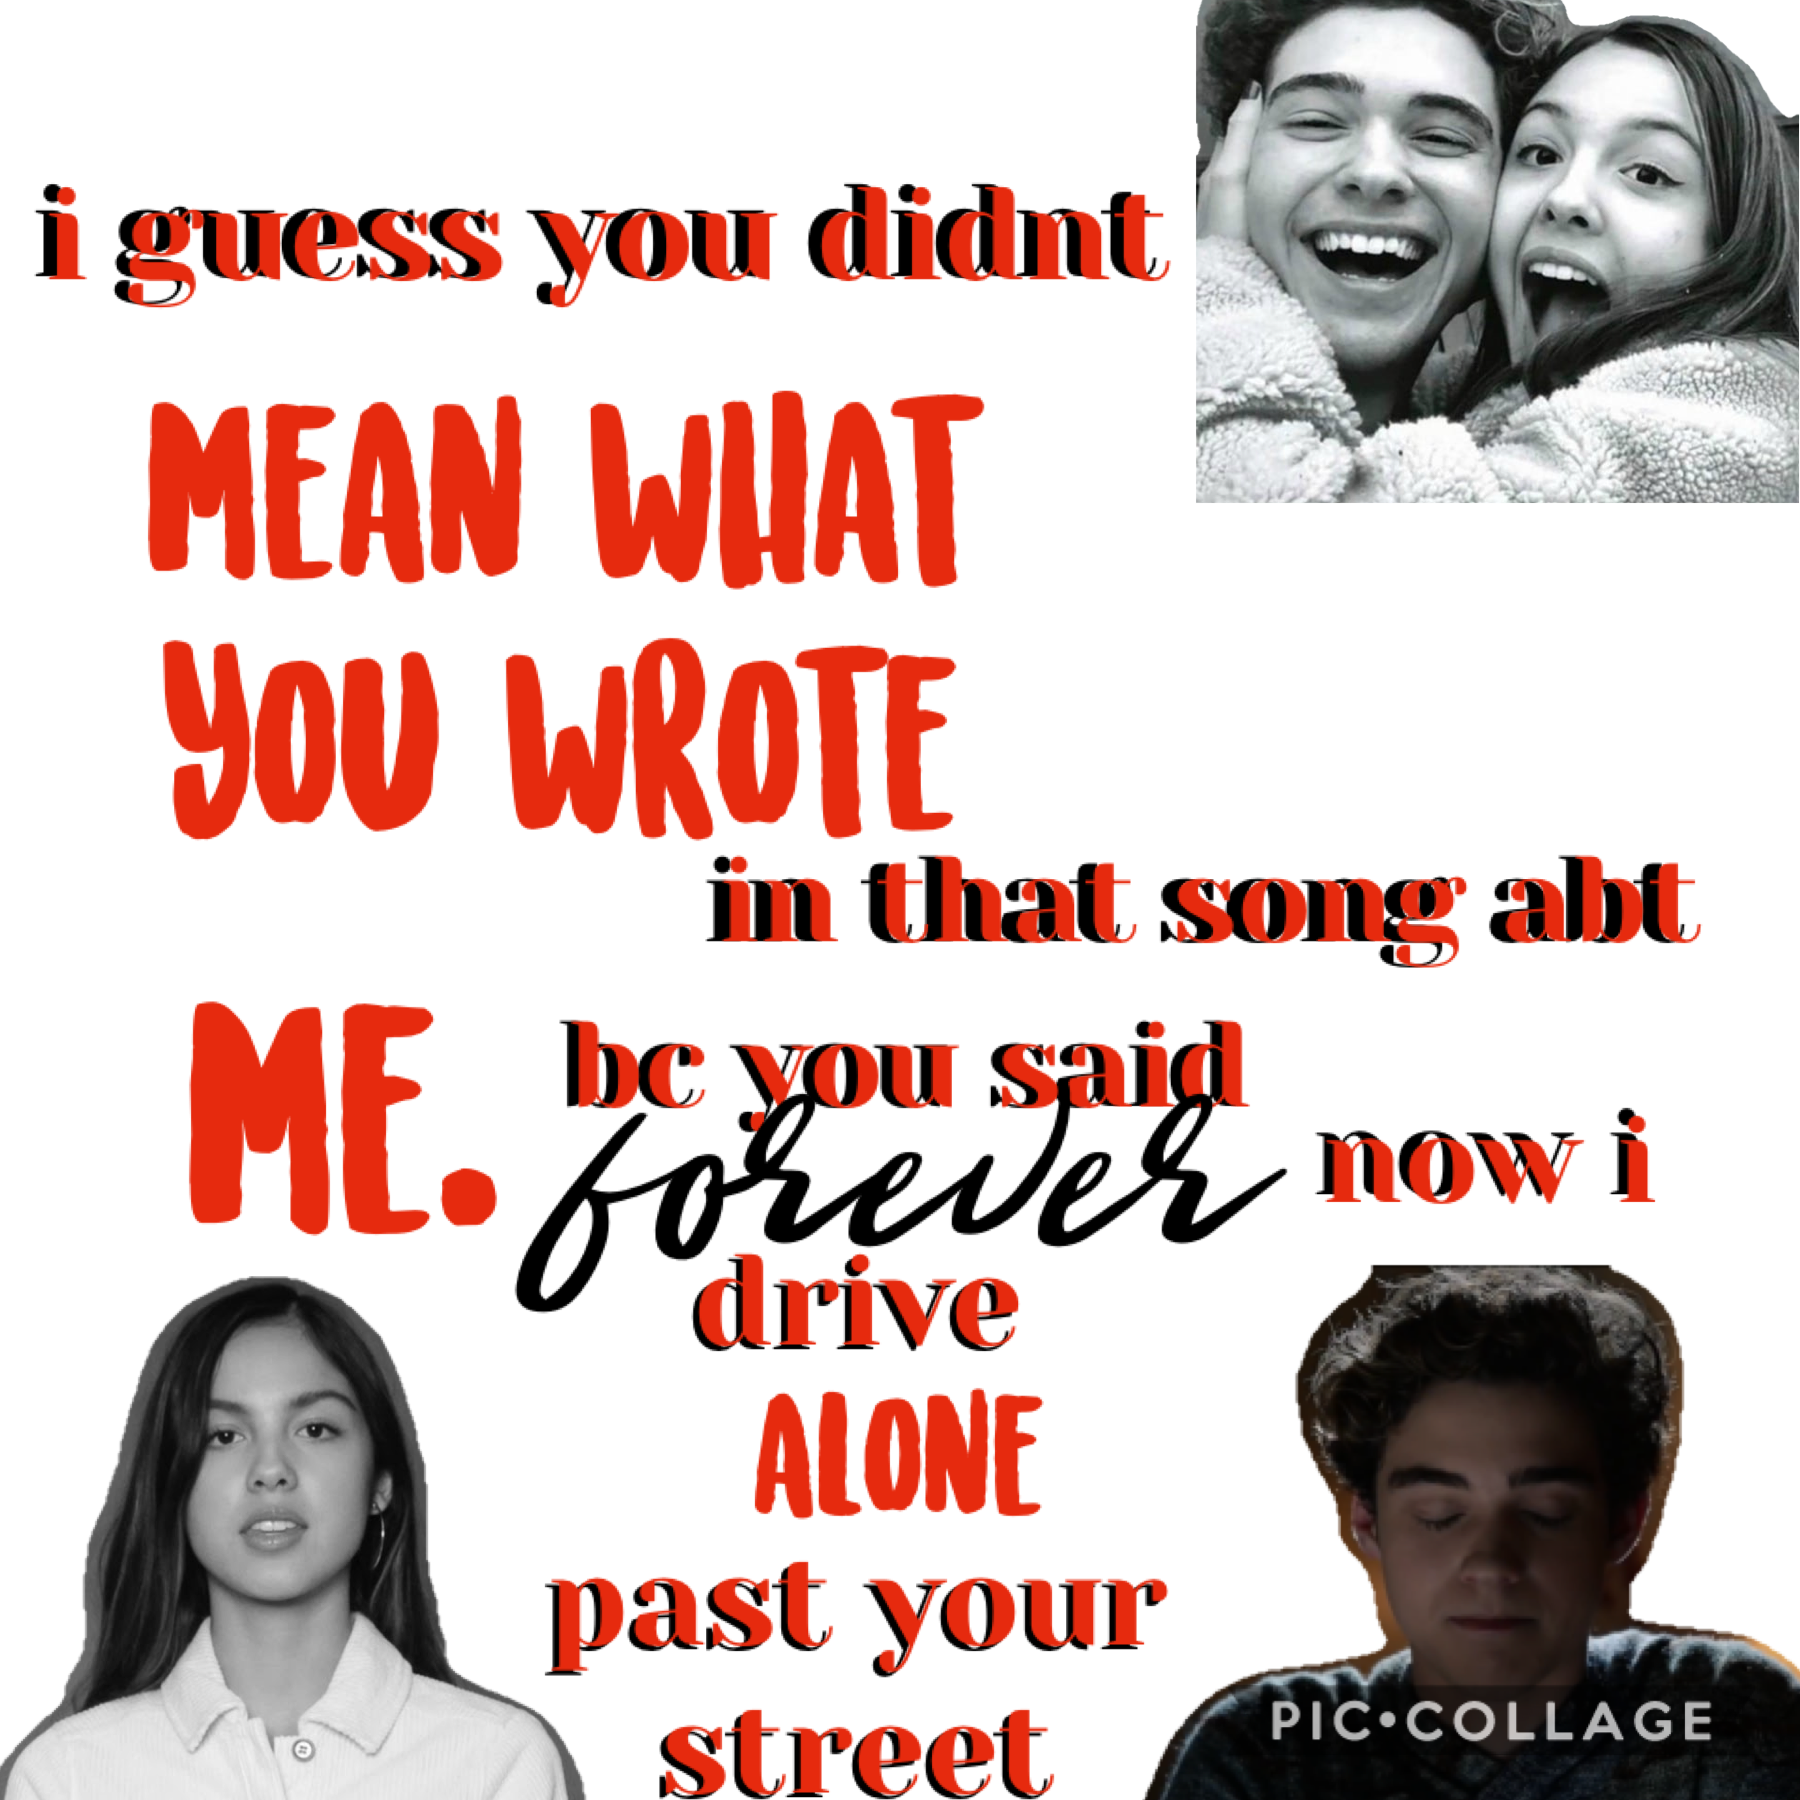 tApP

so i heard the song as soon as it came out and i fell in love with it... so yea this isn’t my best work but yea idk lol